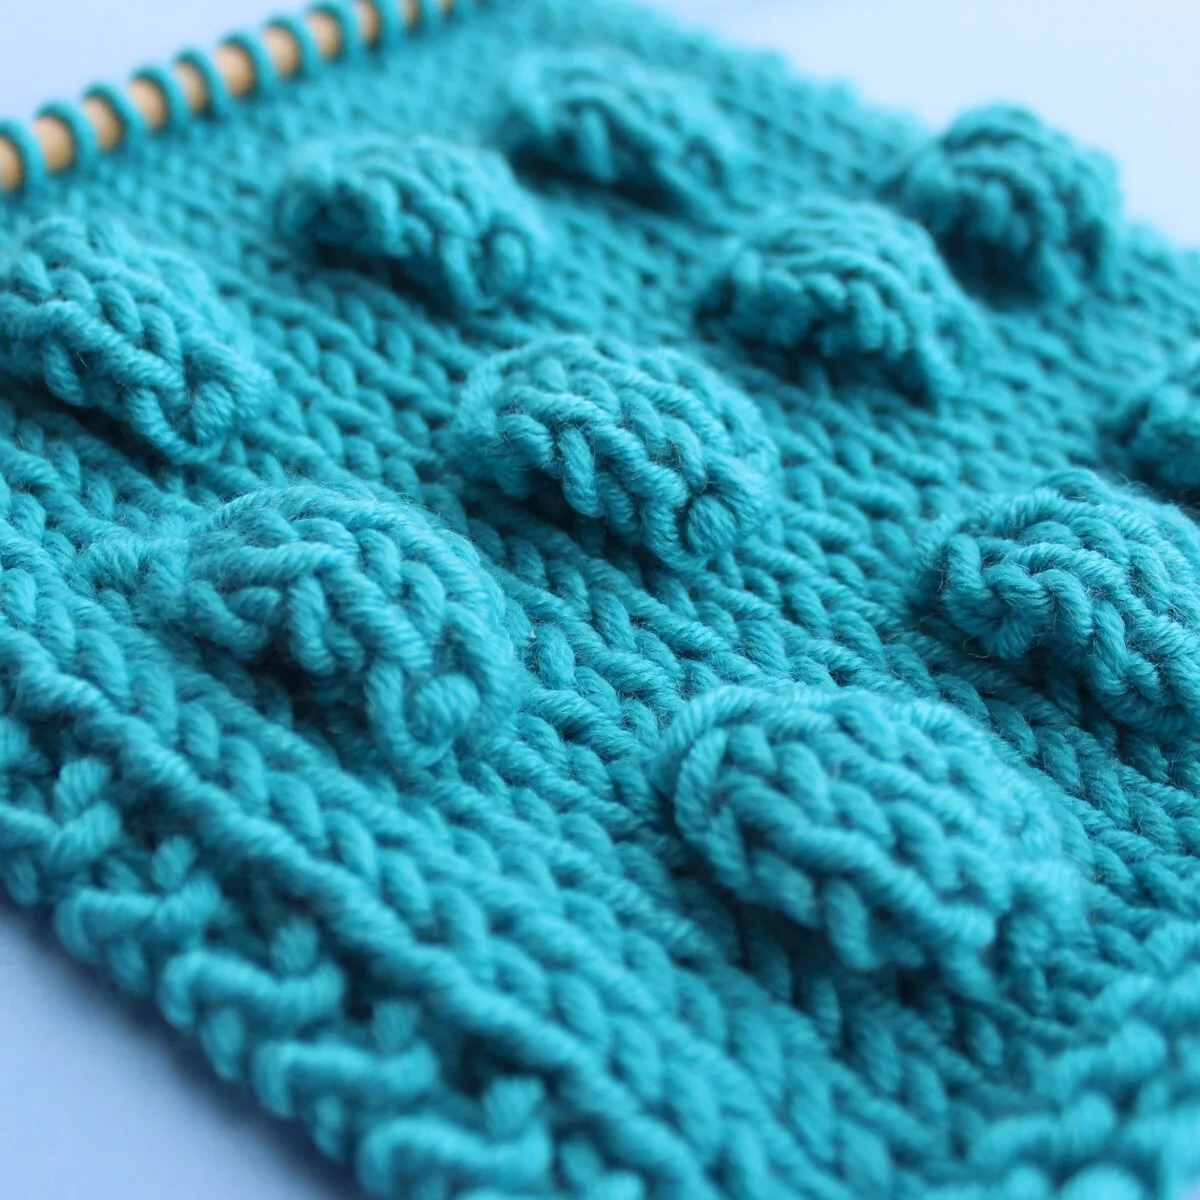 Side angle of Bobbles in Stockinette Stitch on knitting needle in blue color yarn.